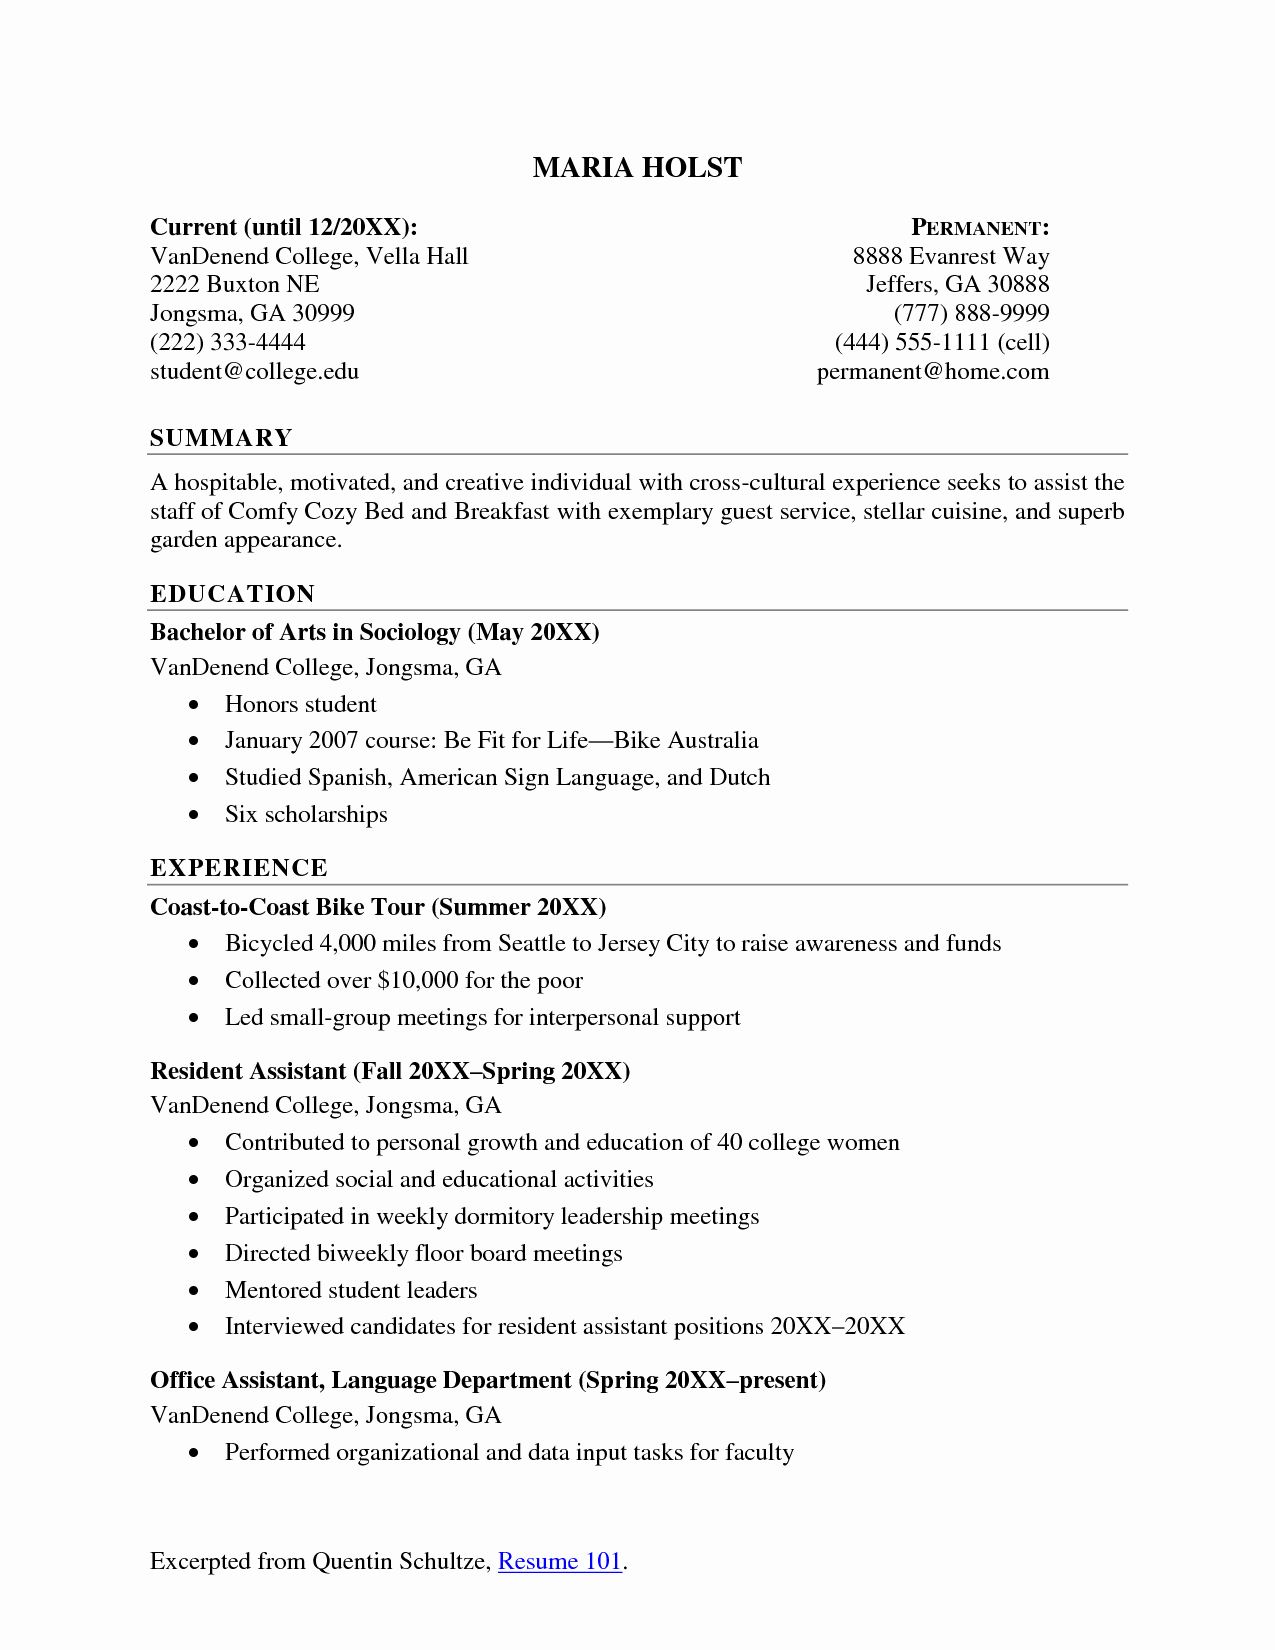 Sample Resume for College Student Supermamans